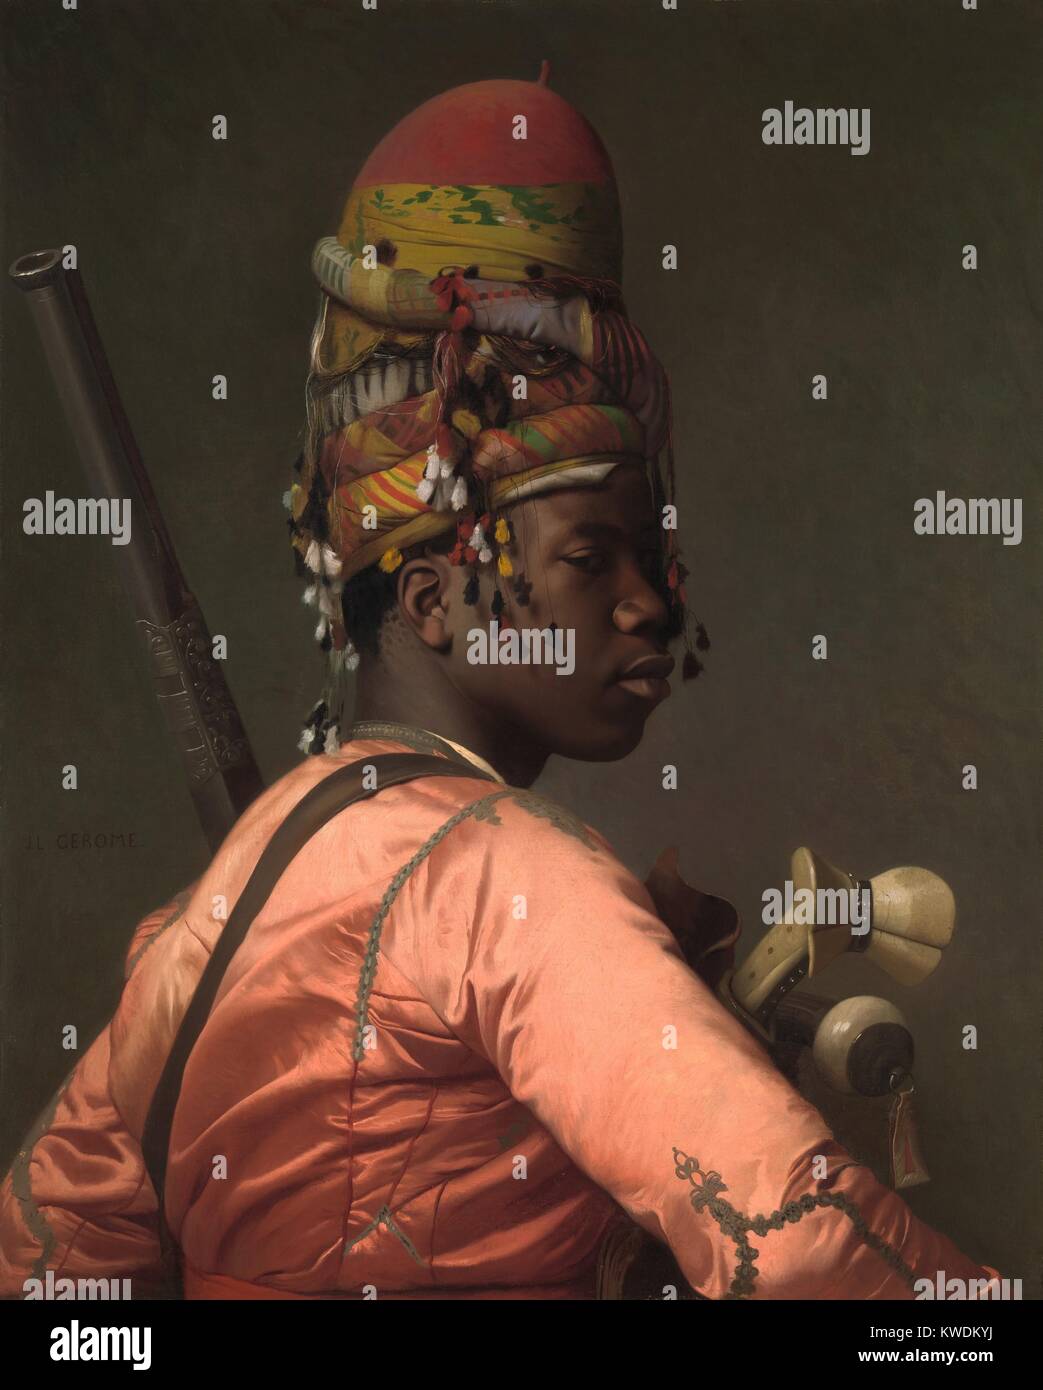 BASHI-BAZOUK, by Jean-Leon Gerome, 1868-69, French painting, oil on canvas. The Turkish title translates as headless and refers to the mercenary soldiers who fought for plunder under the Ottoman Turks. This detailed and lifelike portrait was painted of an African model in Geromes Paris studio dressed in textiles the artist brought back from his expedition to the Near East in 1868 (BSLOC 2017 9 77) Stock Photo